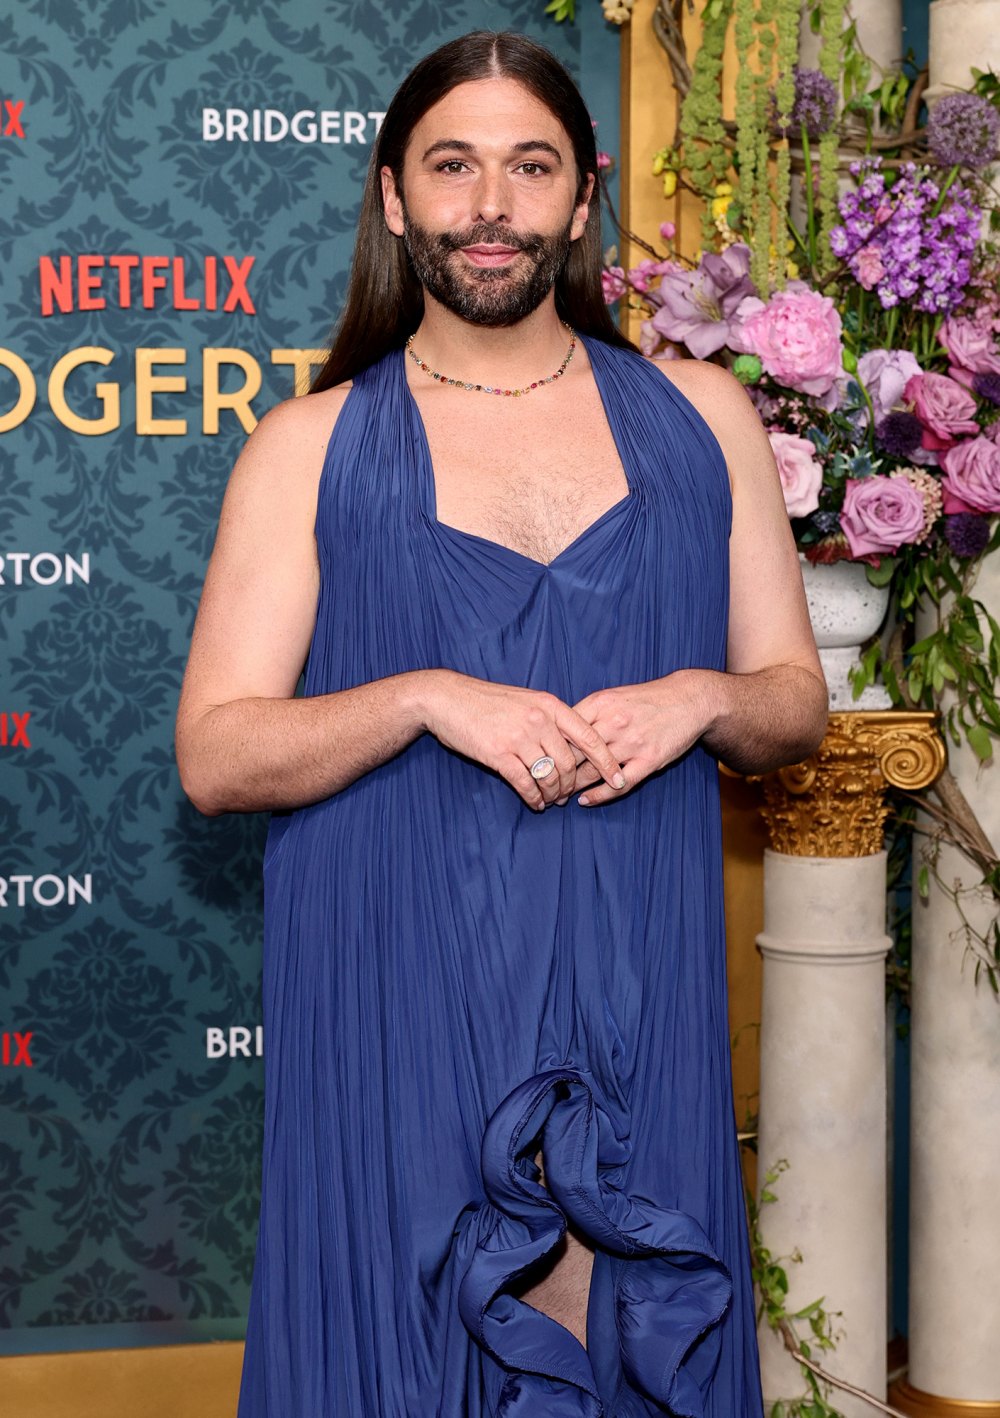 Jonathan Van Ness Felt Like They Were 'Walking on Eggshells' After Behavioral Accusations